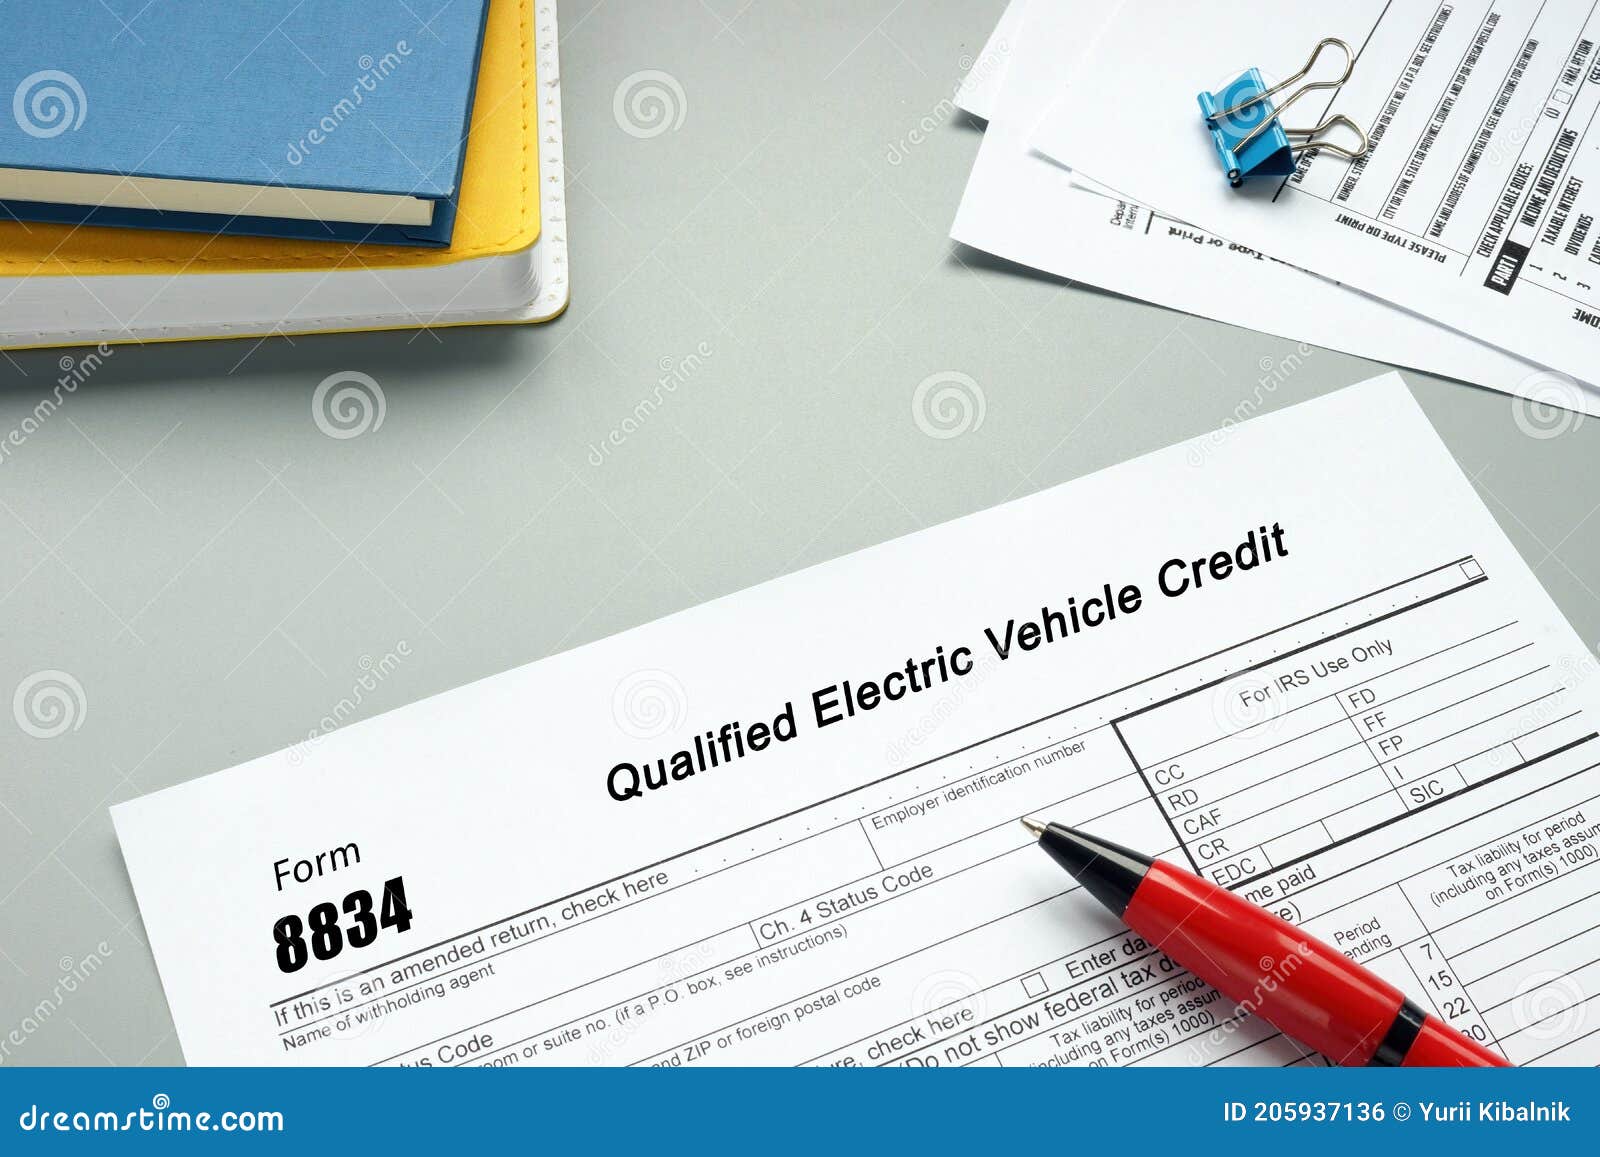 form-8834-qualified-electric-vehicle-credit-inscription-on-the-page